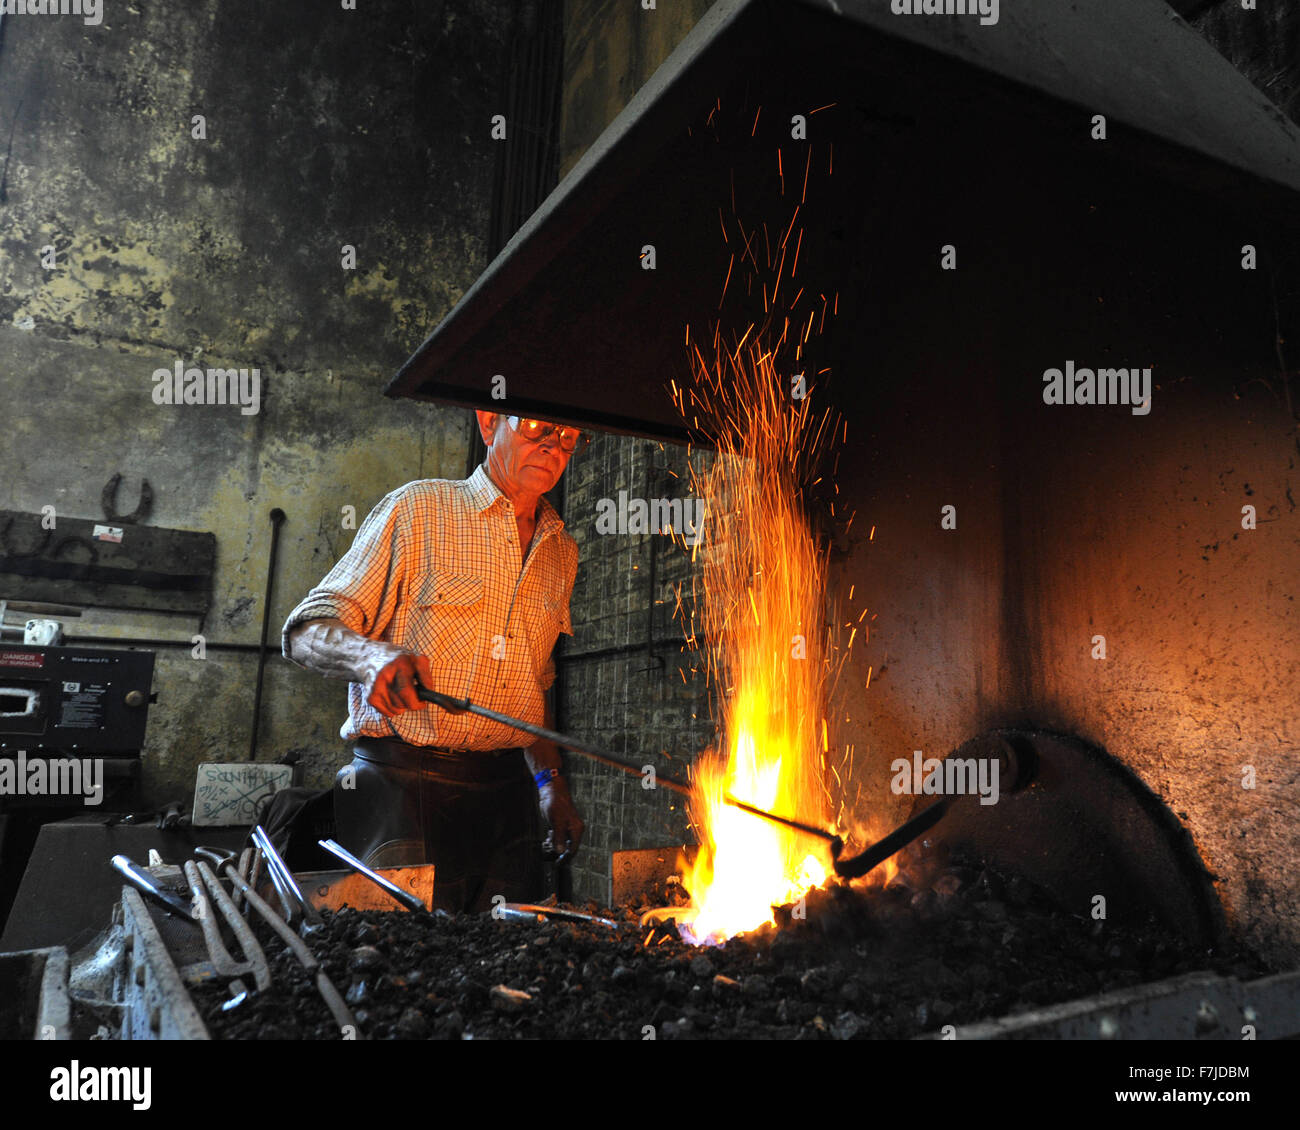 Farrier at work on horse shoe in forge Stock Photo